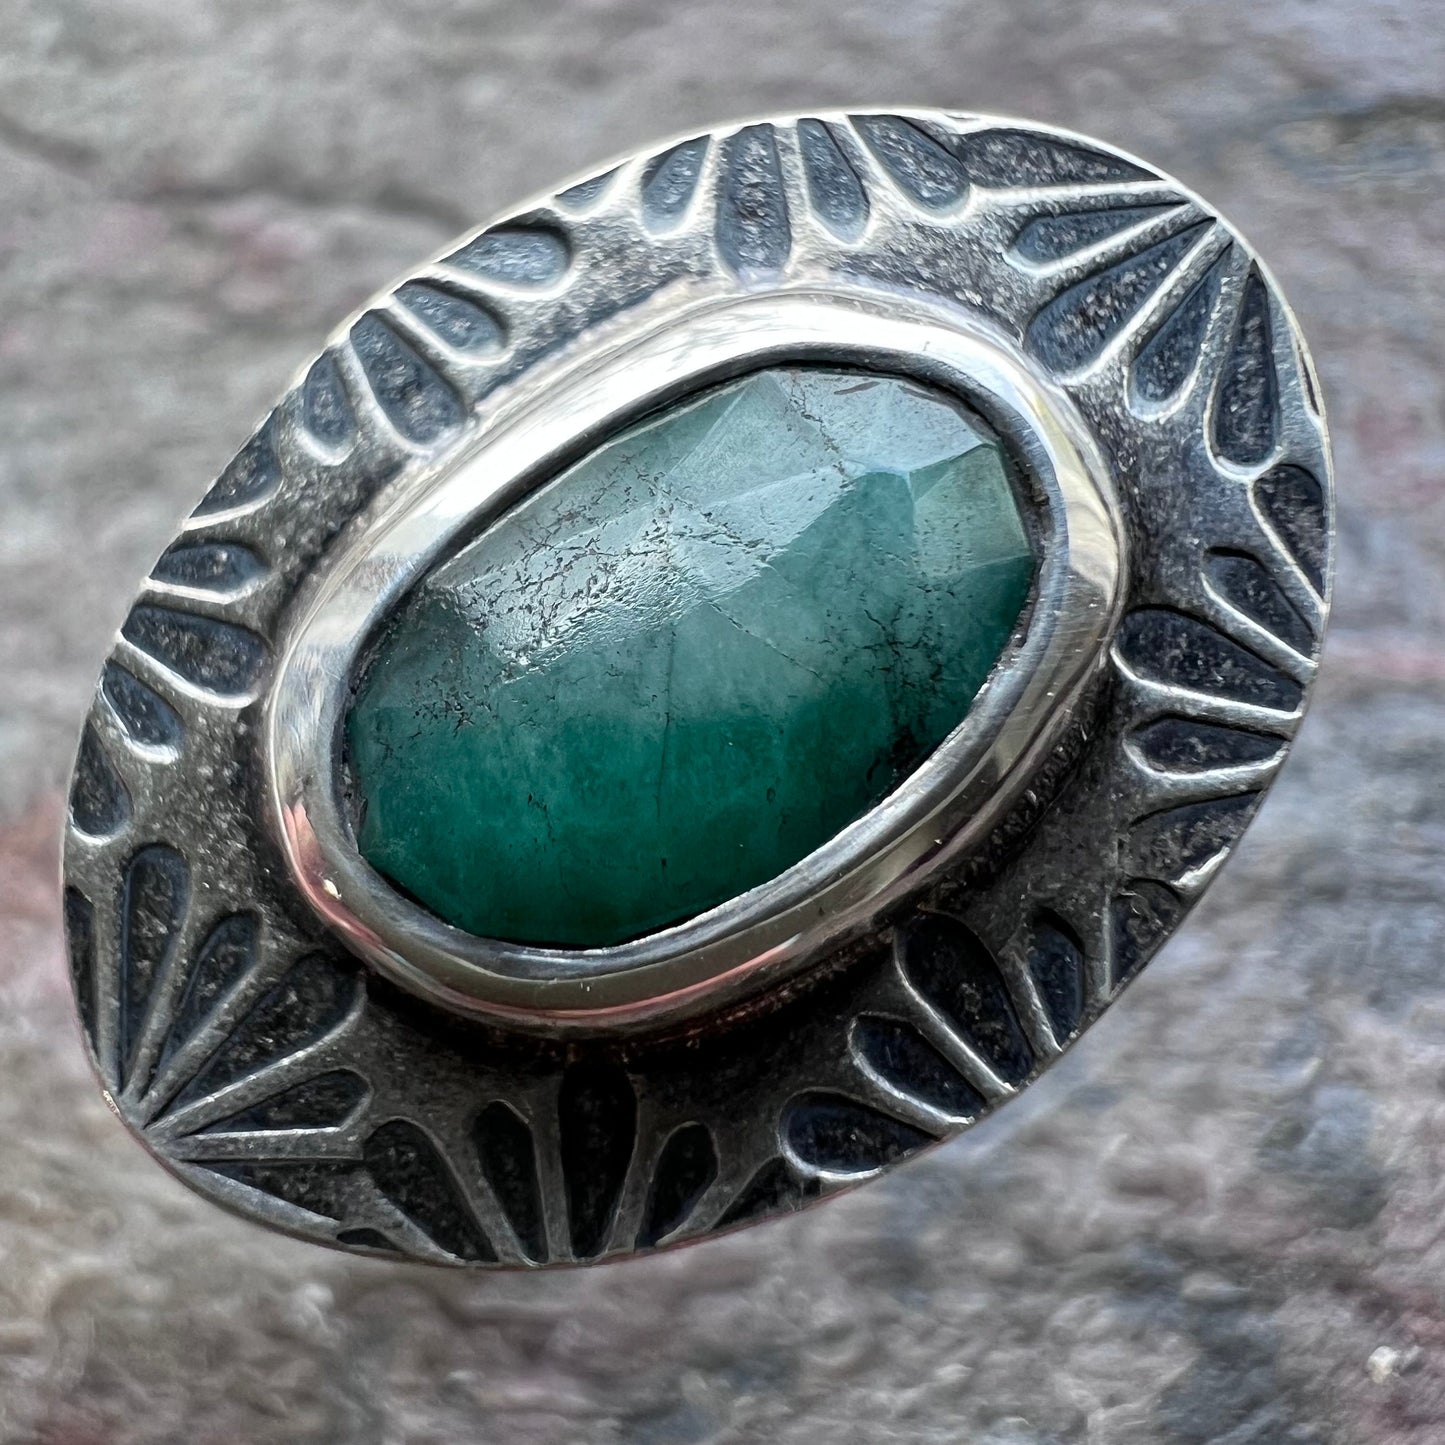 Emerald Sterling Silver Ring - Handmade Genuine Emerald One-of-a-kind Ring - Size 8.5